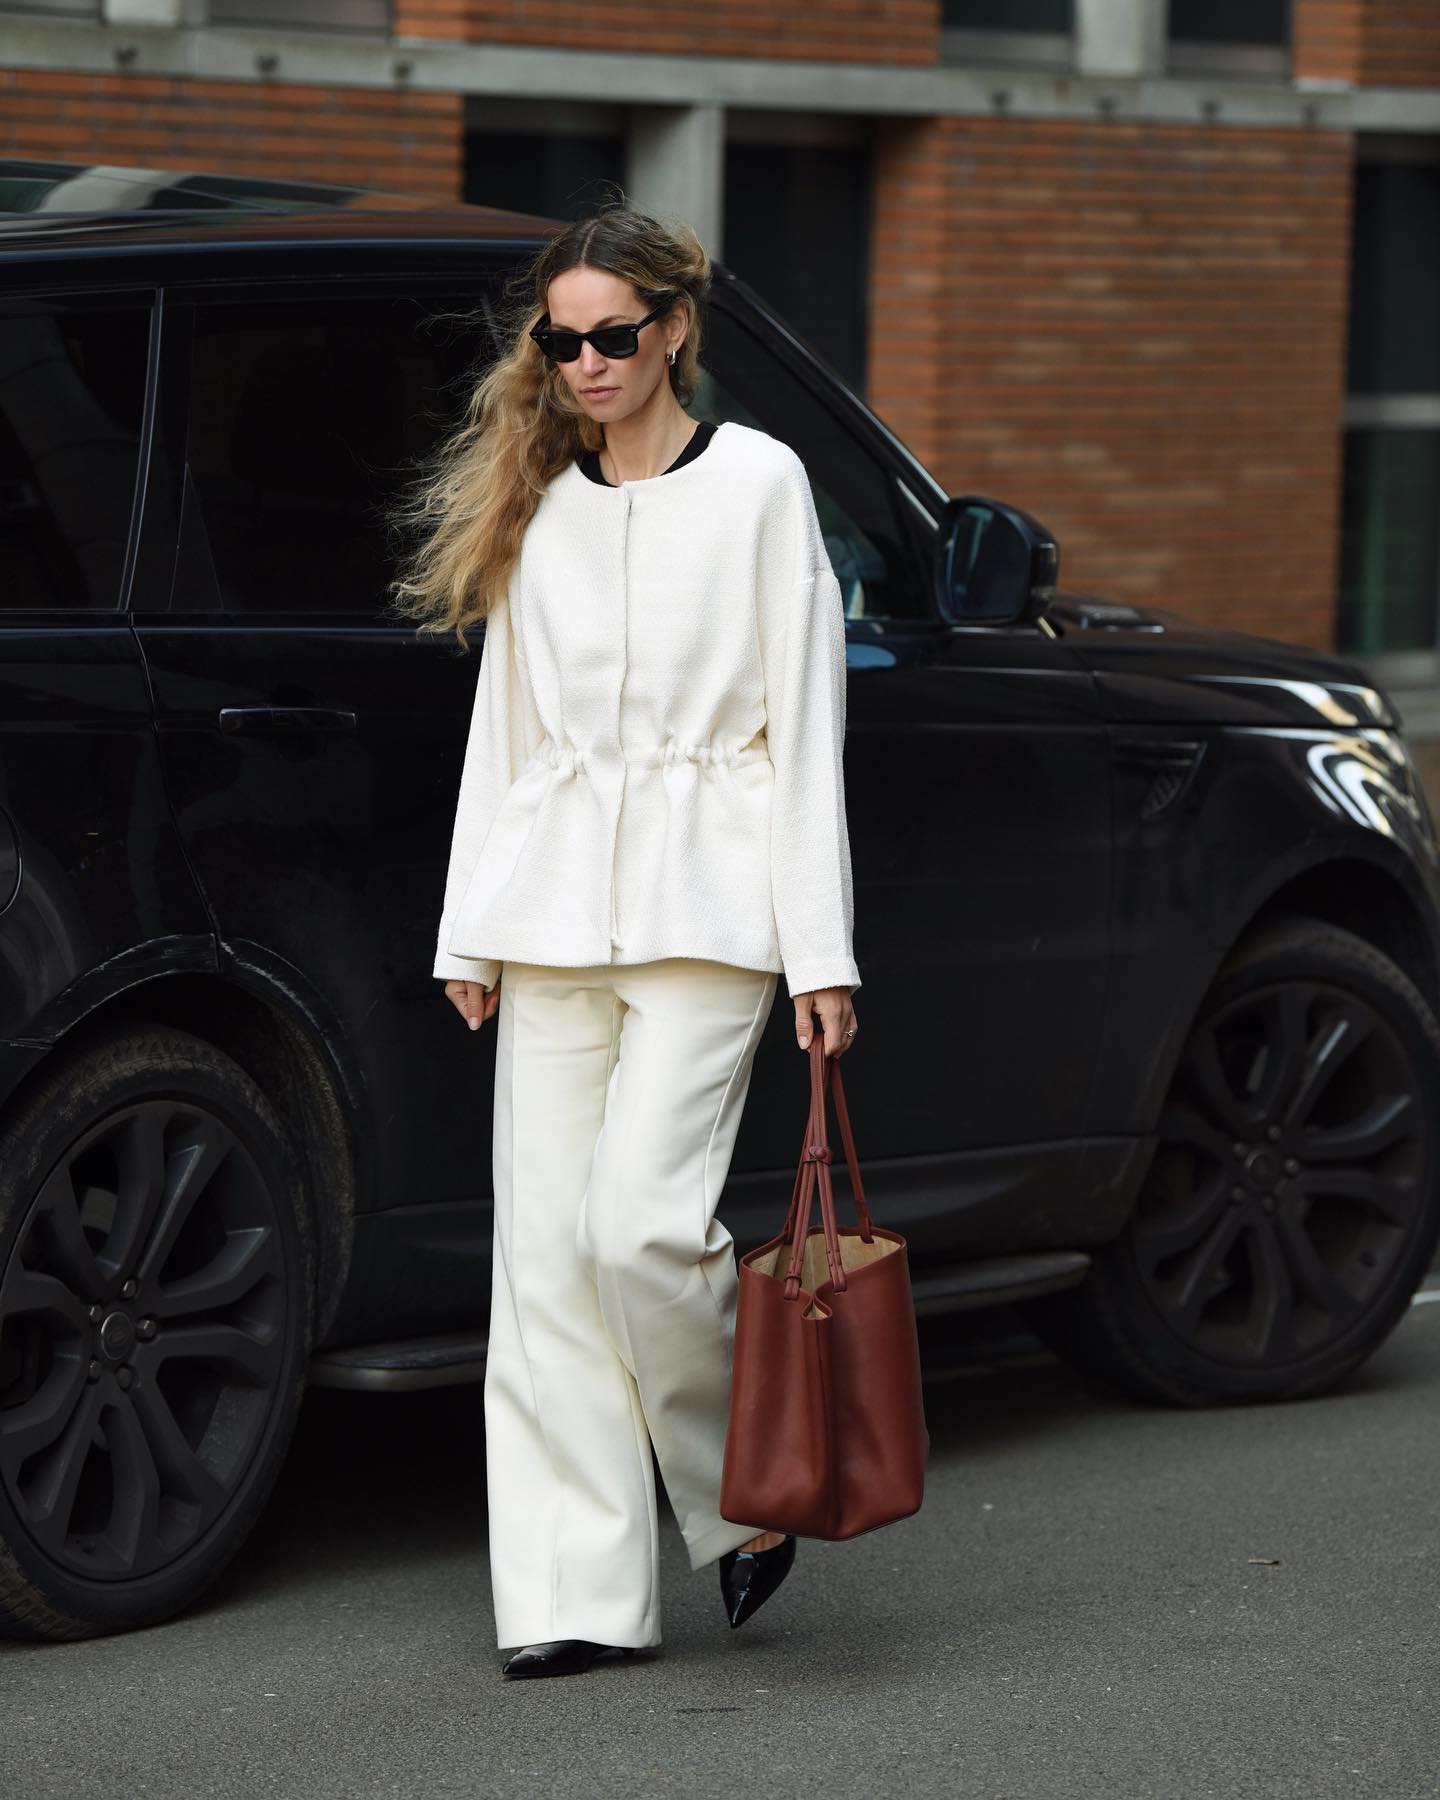 Influencer styles cream trousers with a cream blouse and a burgundy bag.